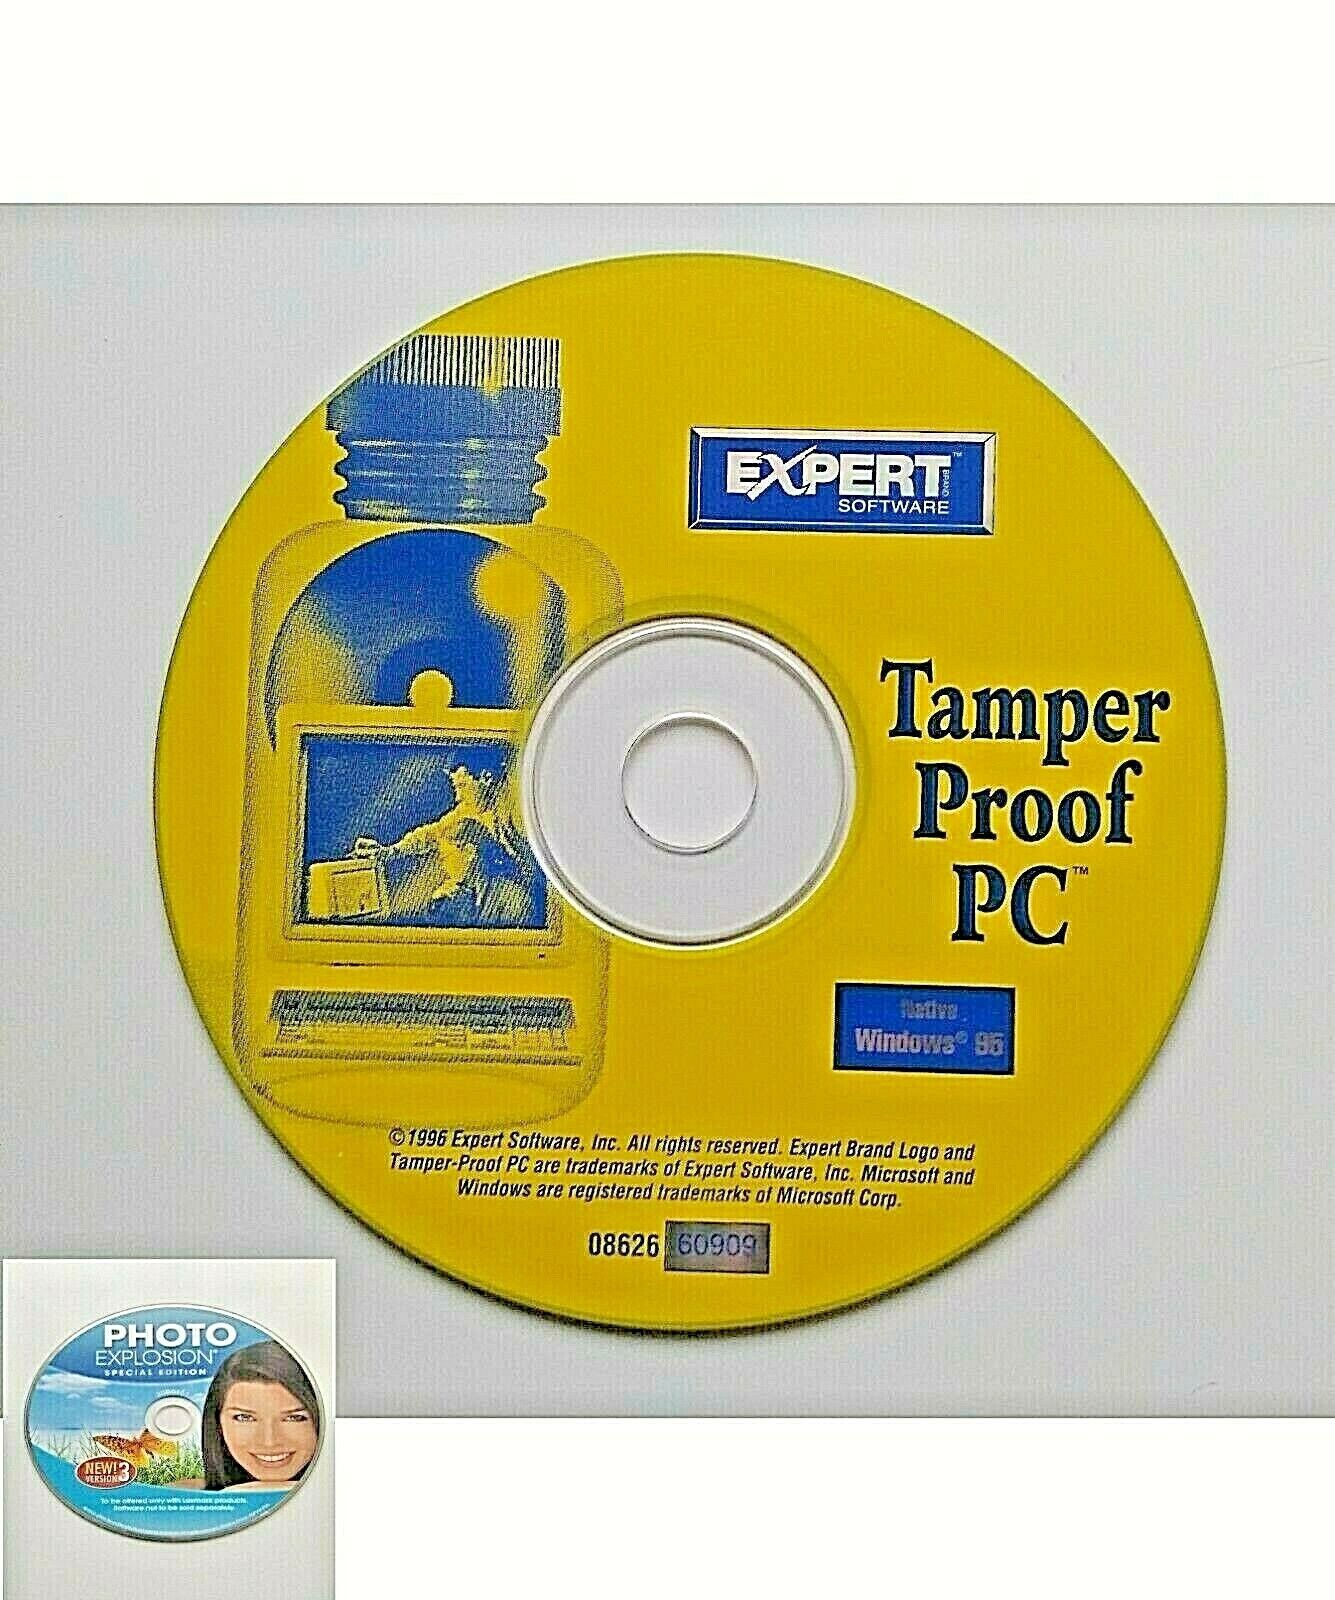 Expert Software Tamper Proof PC and Photo Explosion Special Edition